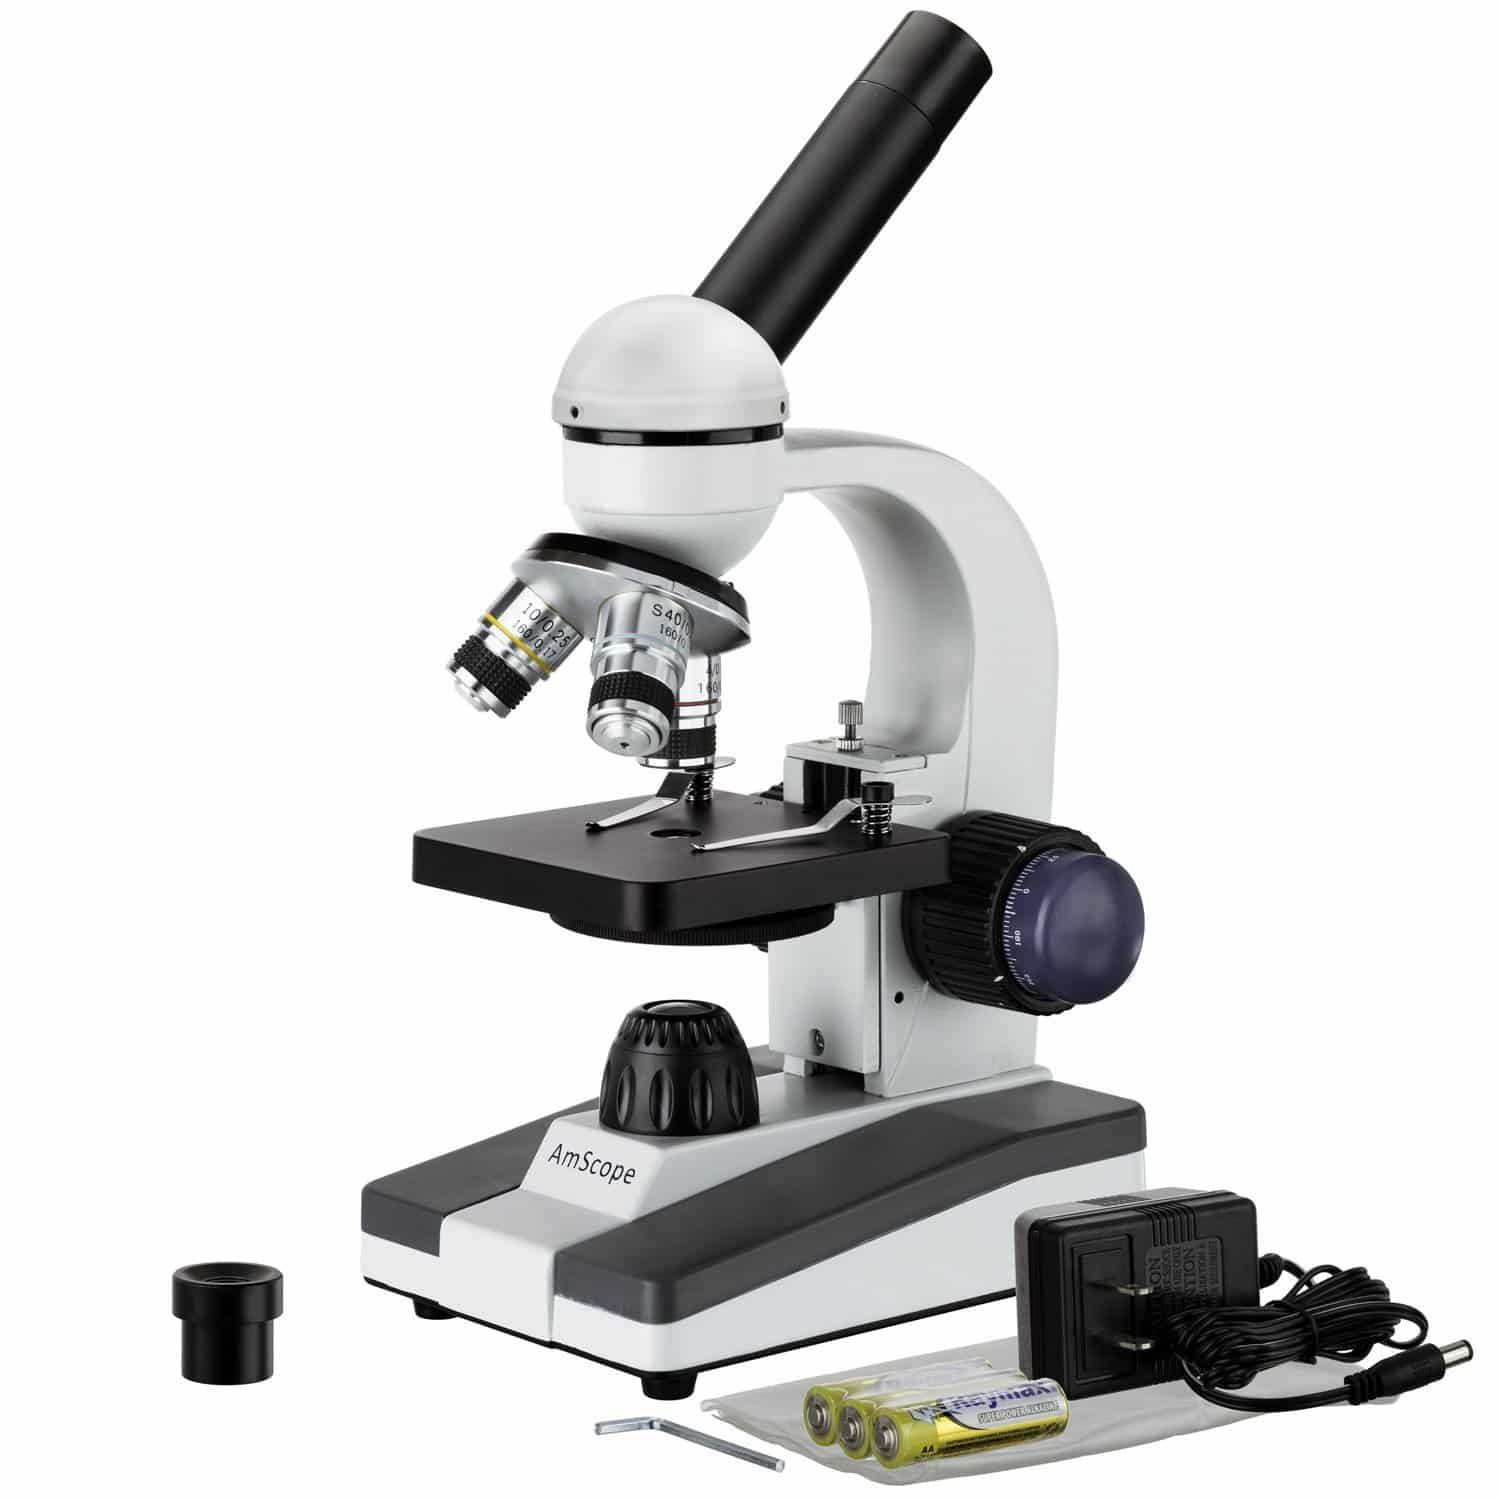 LIGHTNING DEAL ALERT! AmScope Cordless LED Student Biological Compound Microscope – 25% off